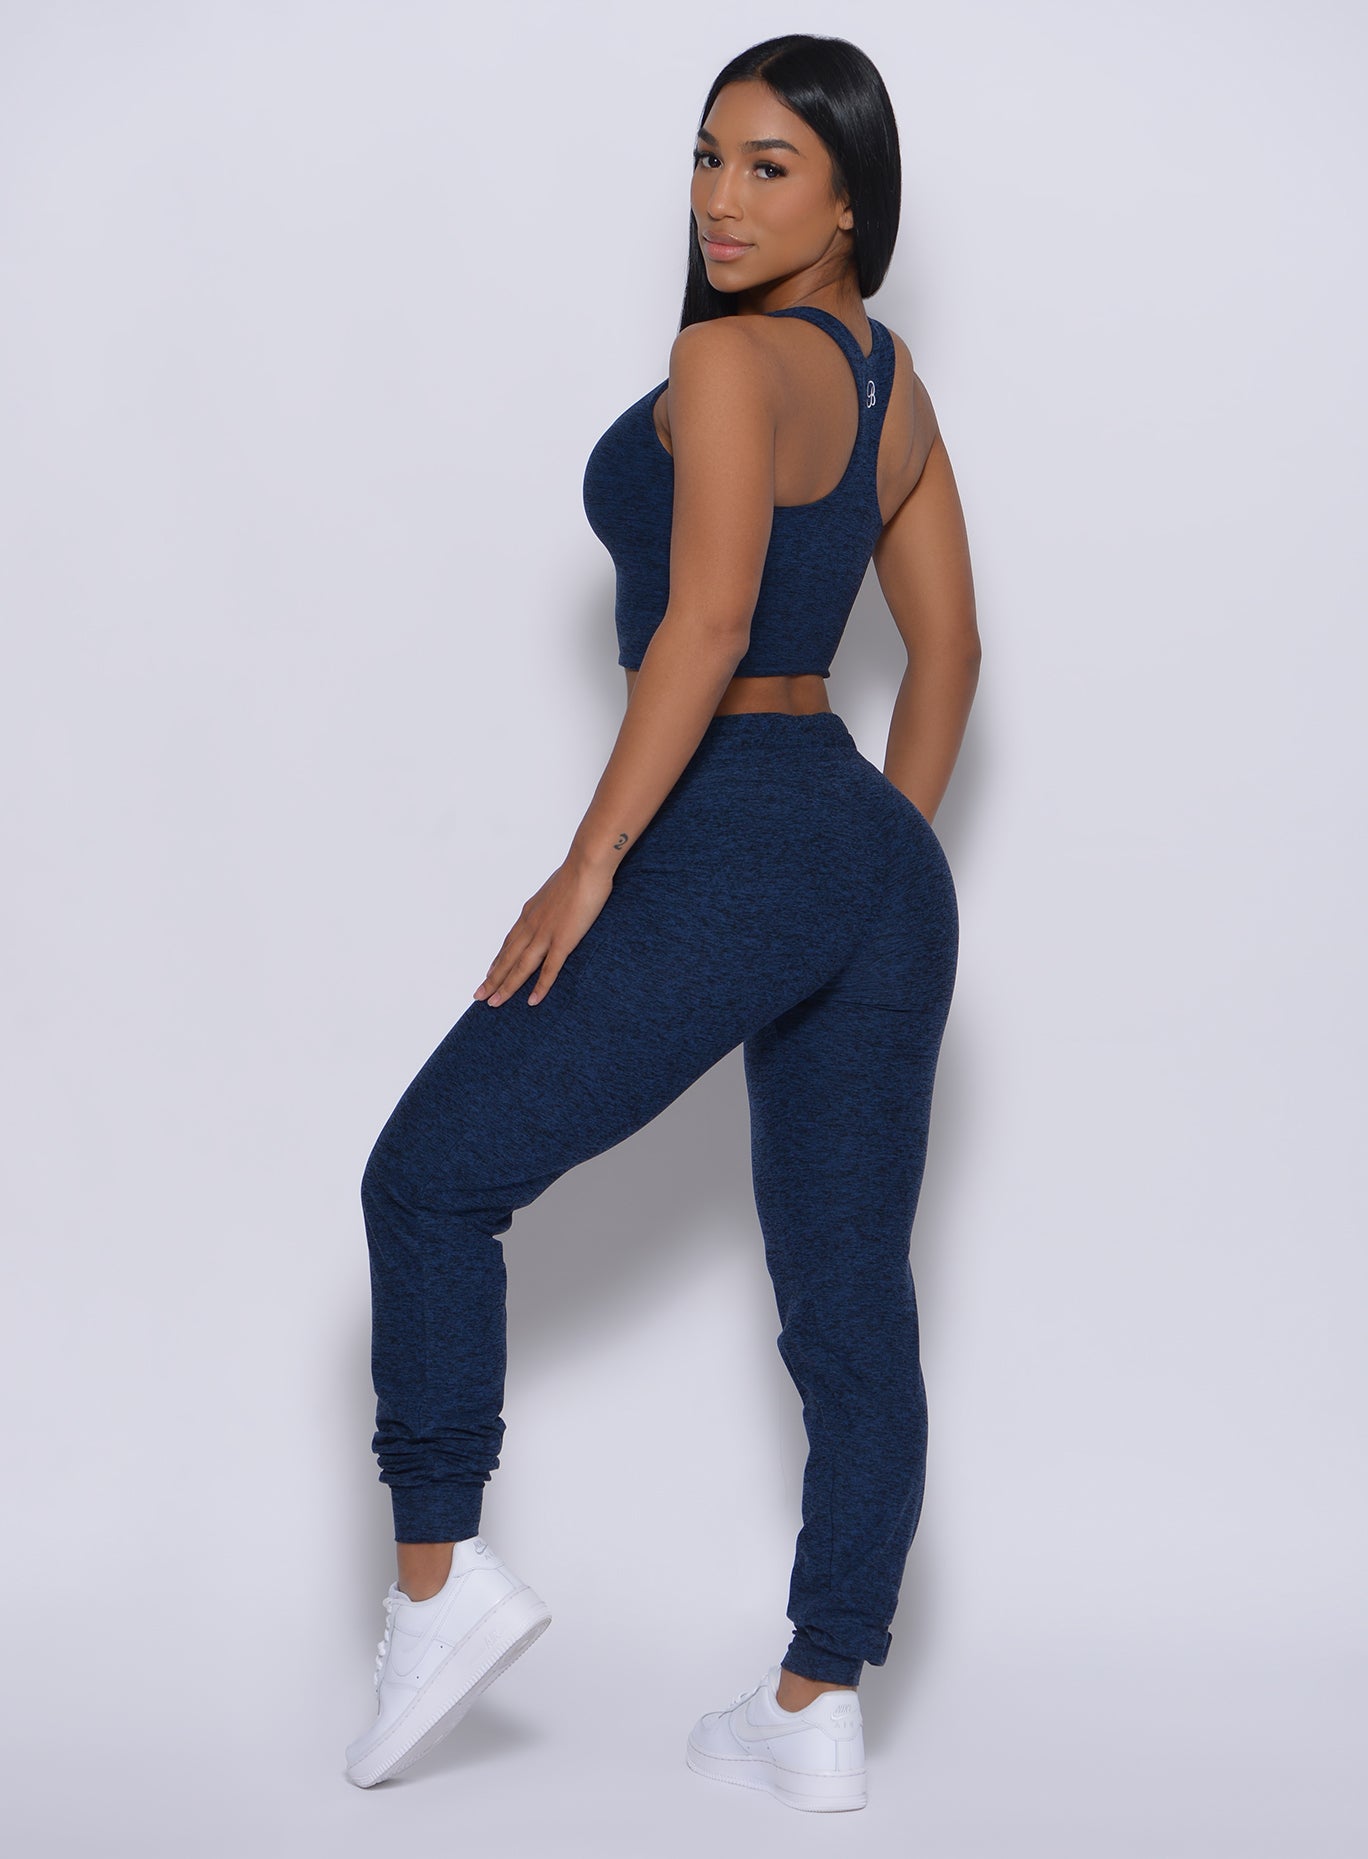 Left side profile view of a model in our signature joggers in sapphire blue color and a matching bra